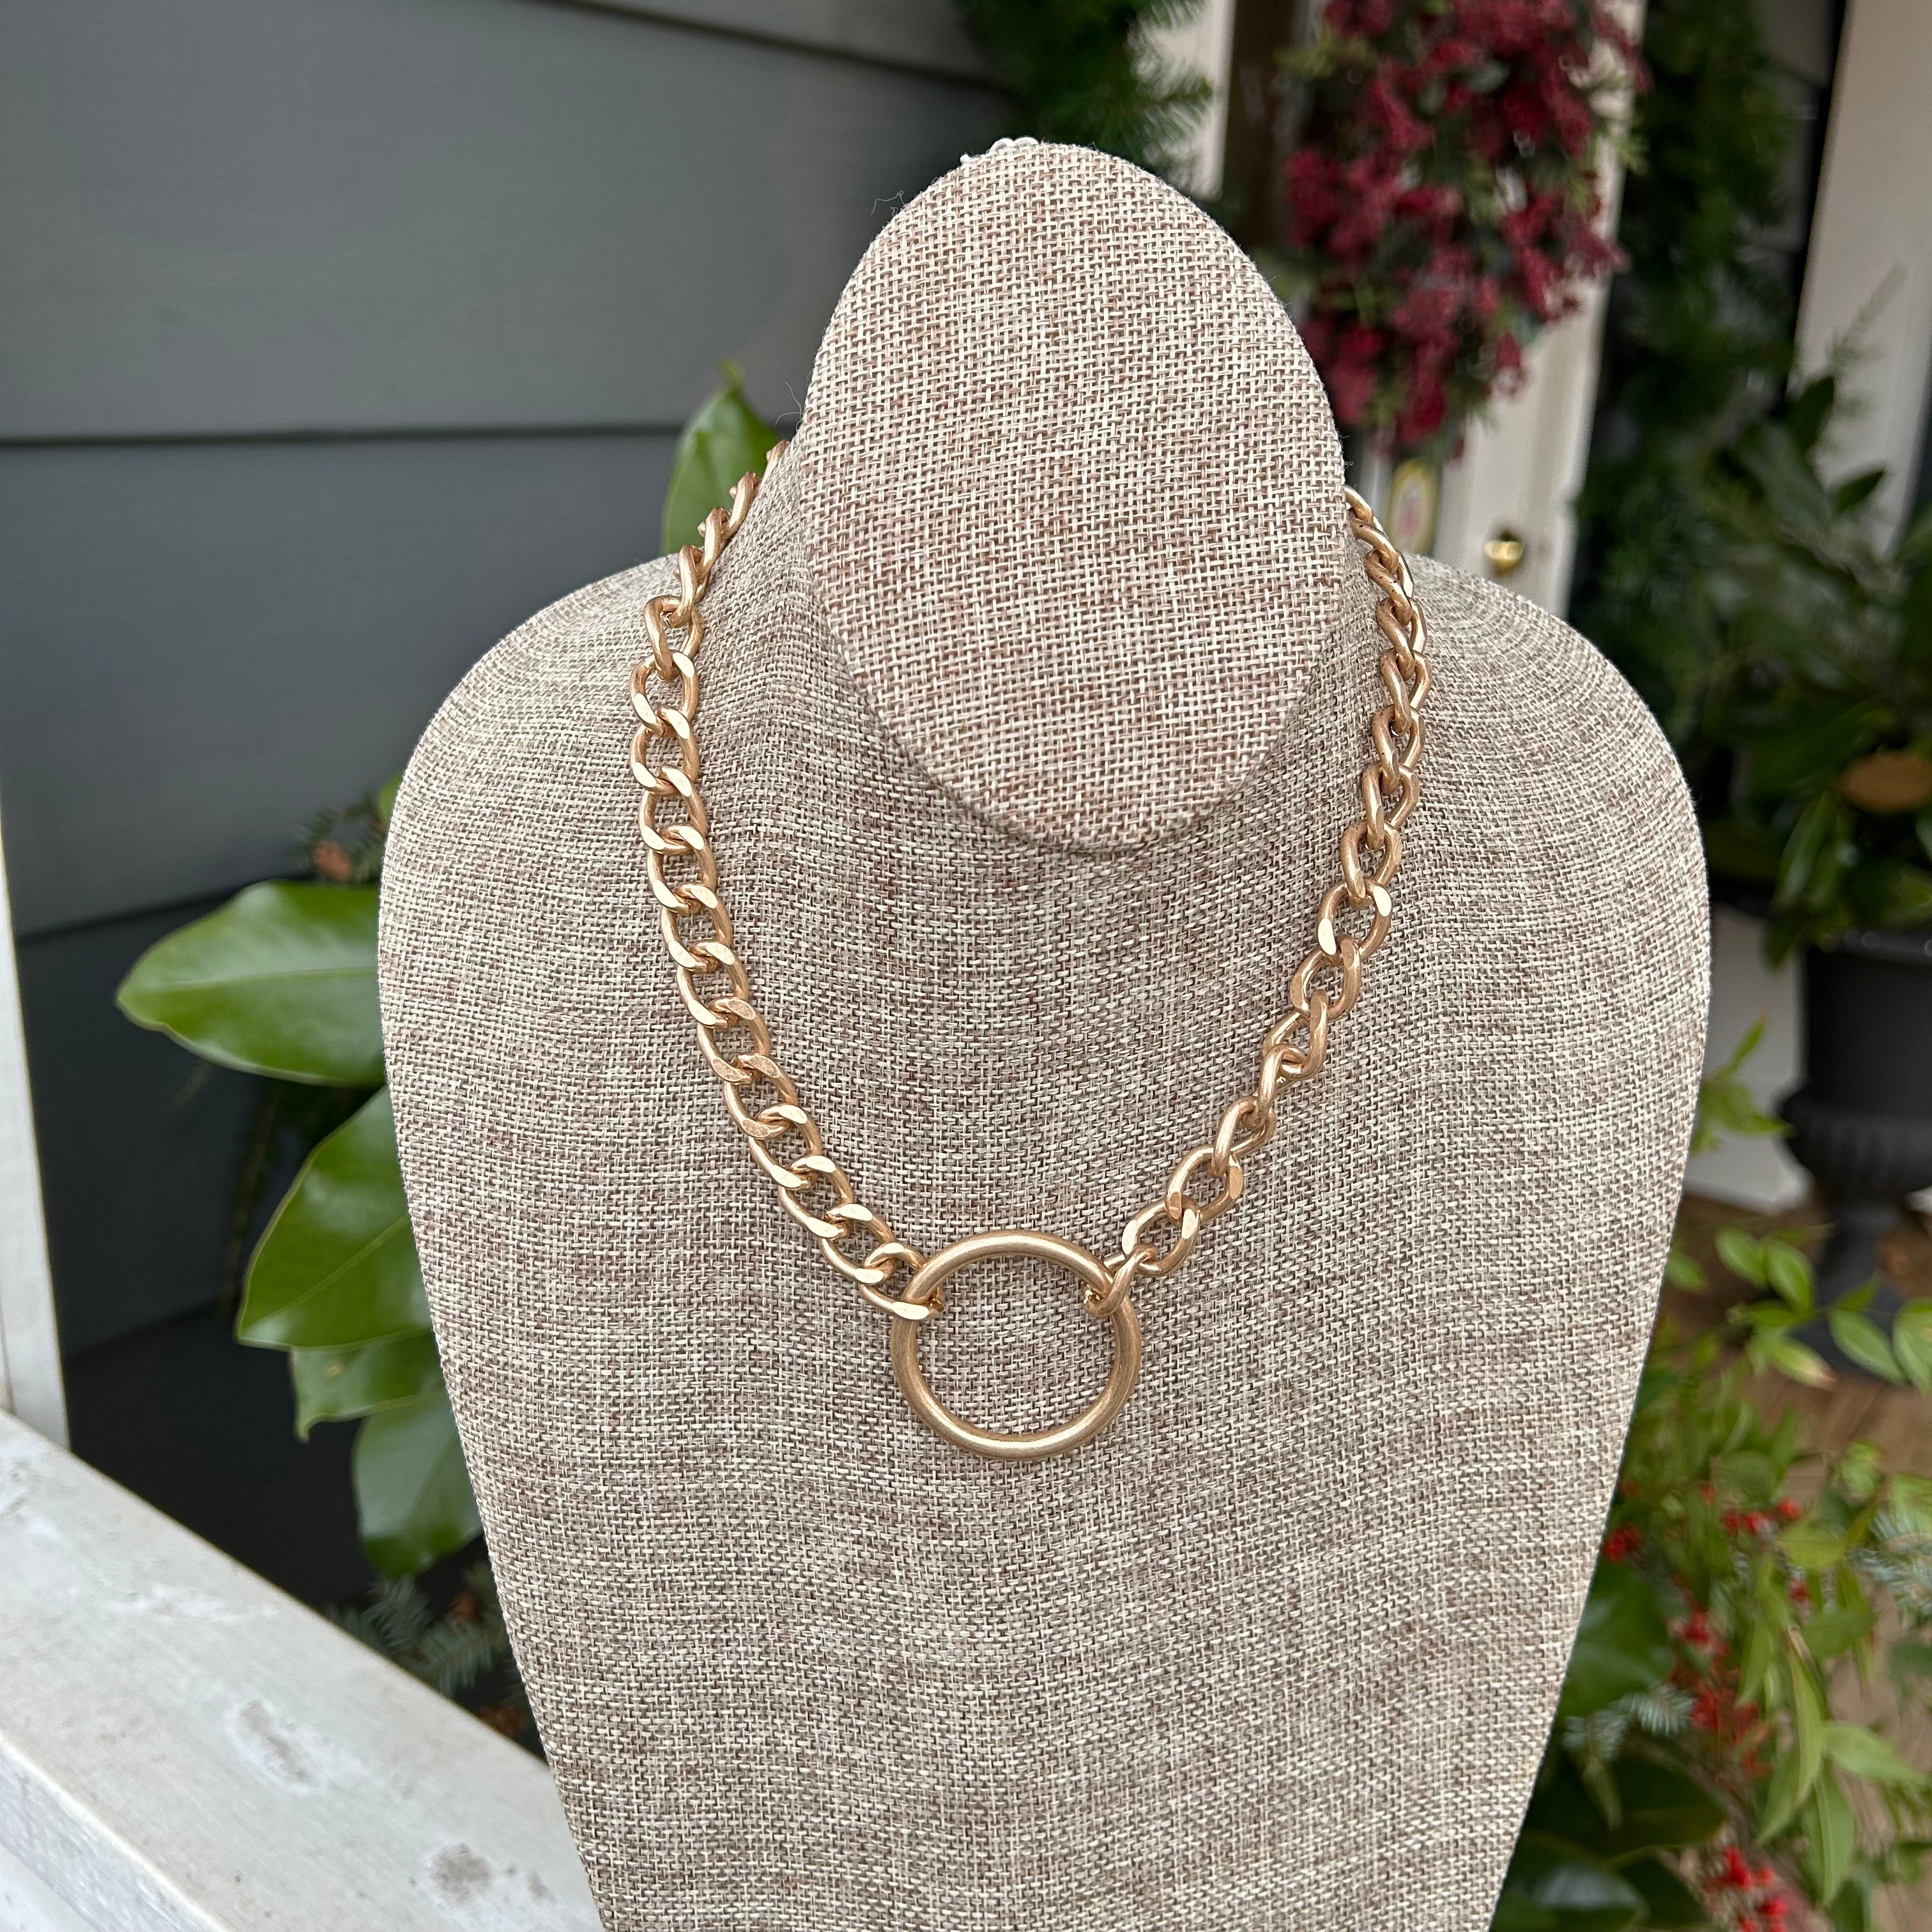 Add some edge to your style with this Chunky Chain Link Necklace featuring a stunning circle pendant – the perfect combination of bold and understated.   Approximate length: 16-19"